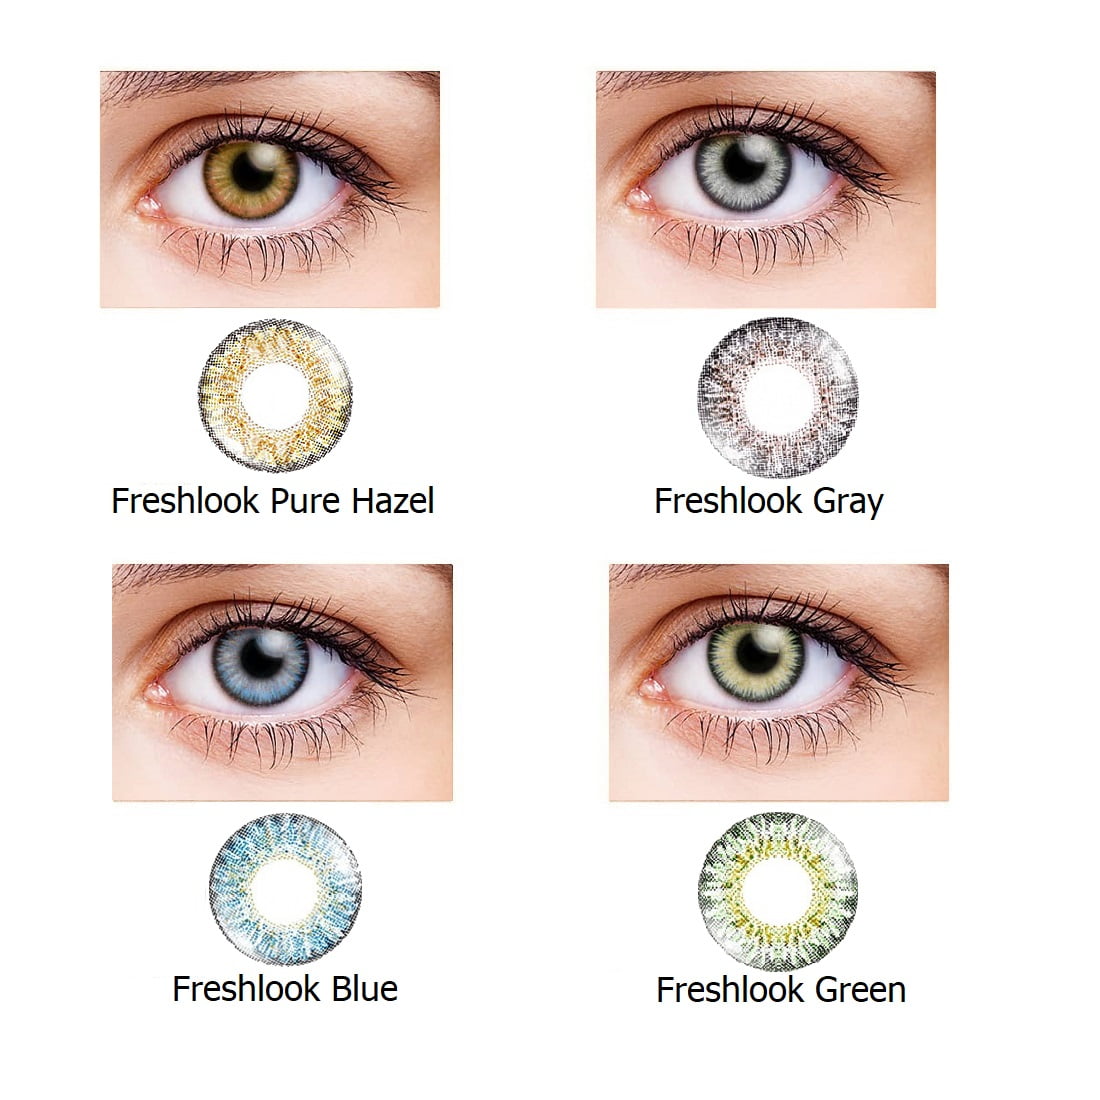 freshlook-one-day-colour-10pcs-in-box-citylens